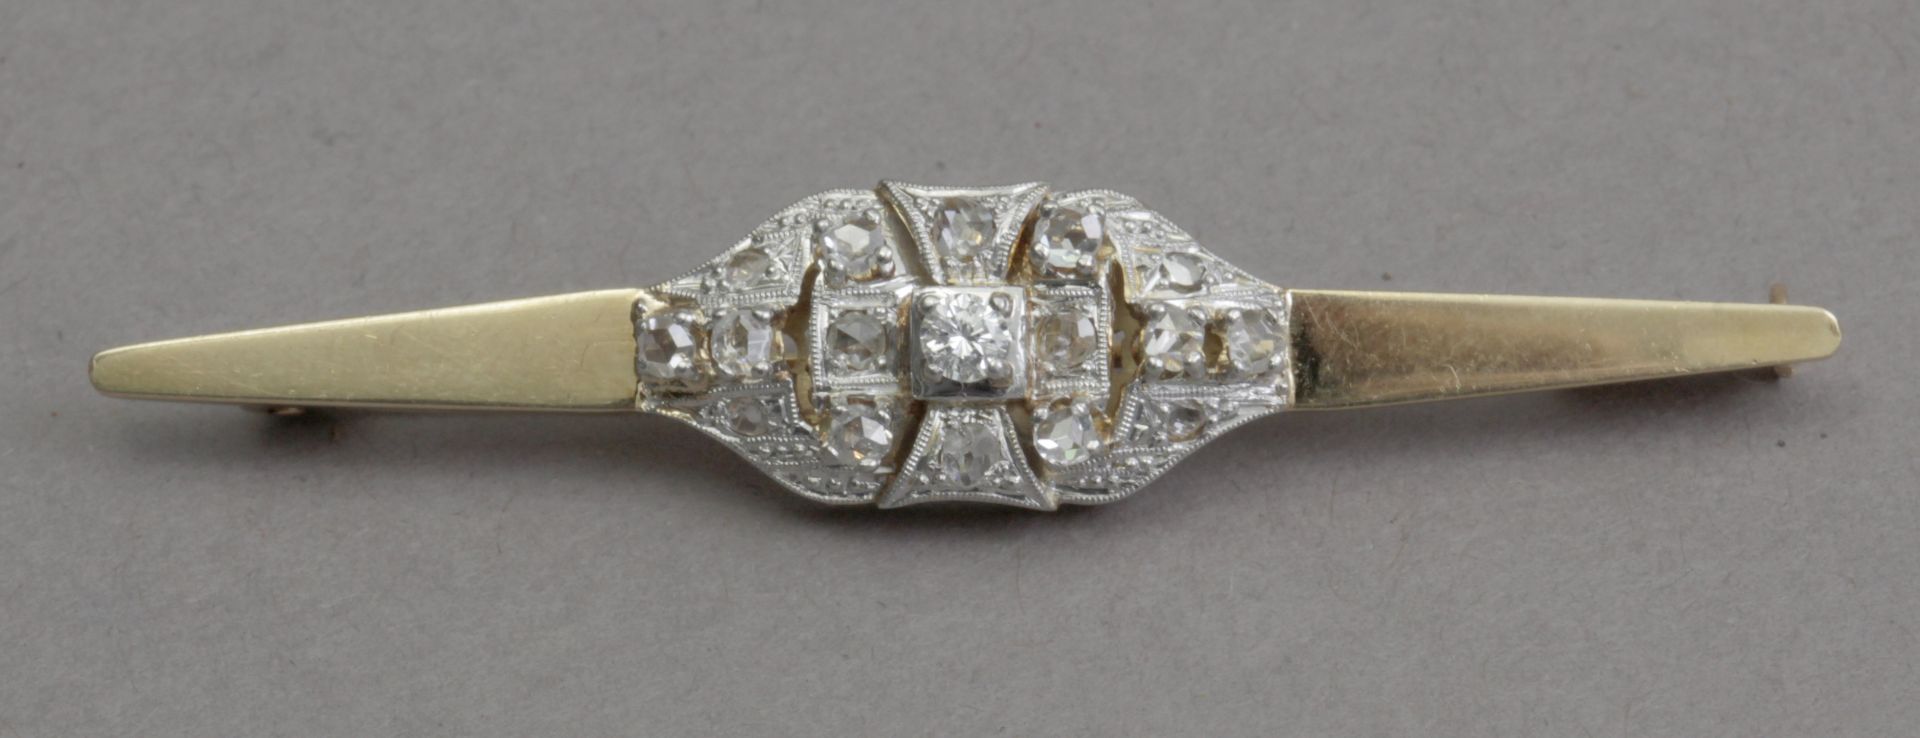 A 20th century Belle Époque style diamond tie pin with an 18k. gold setting